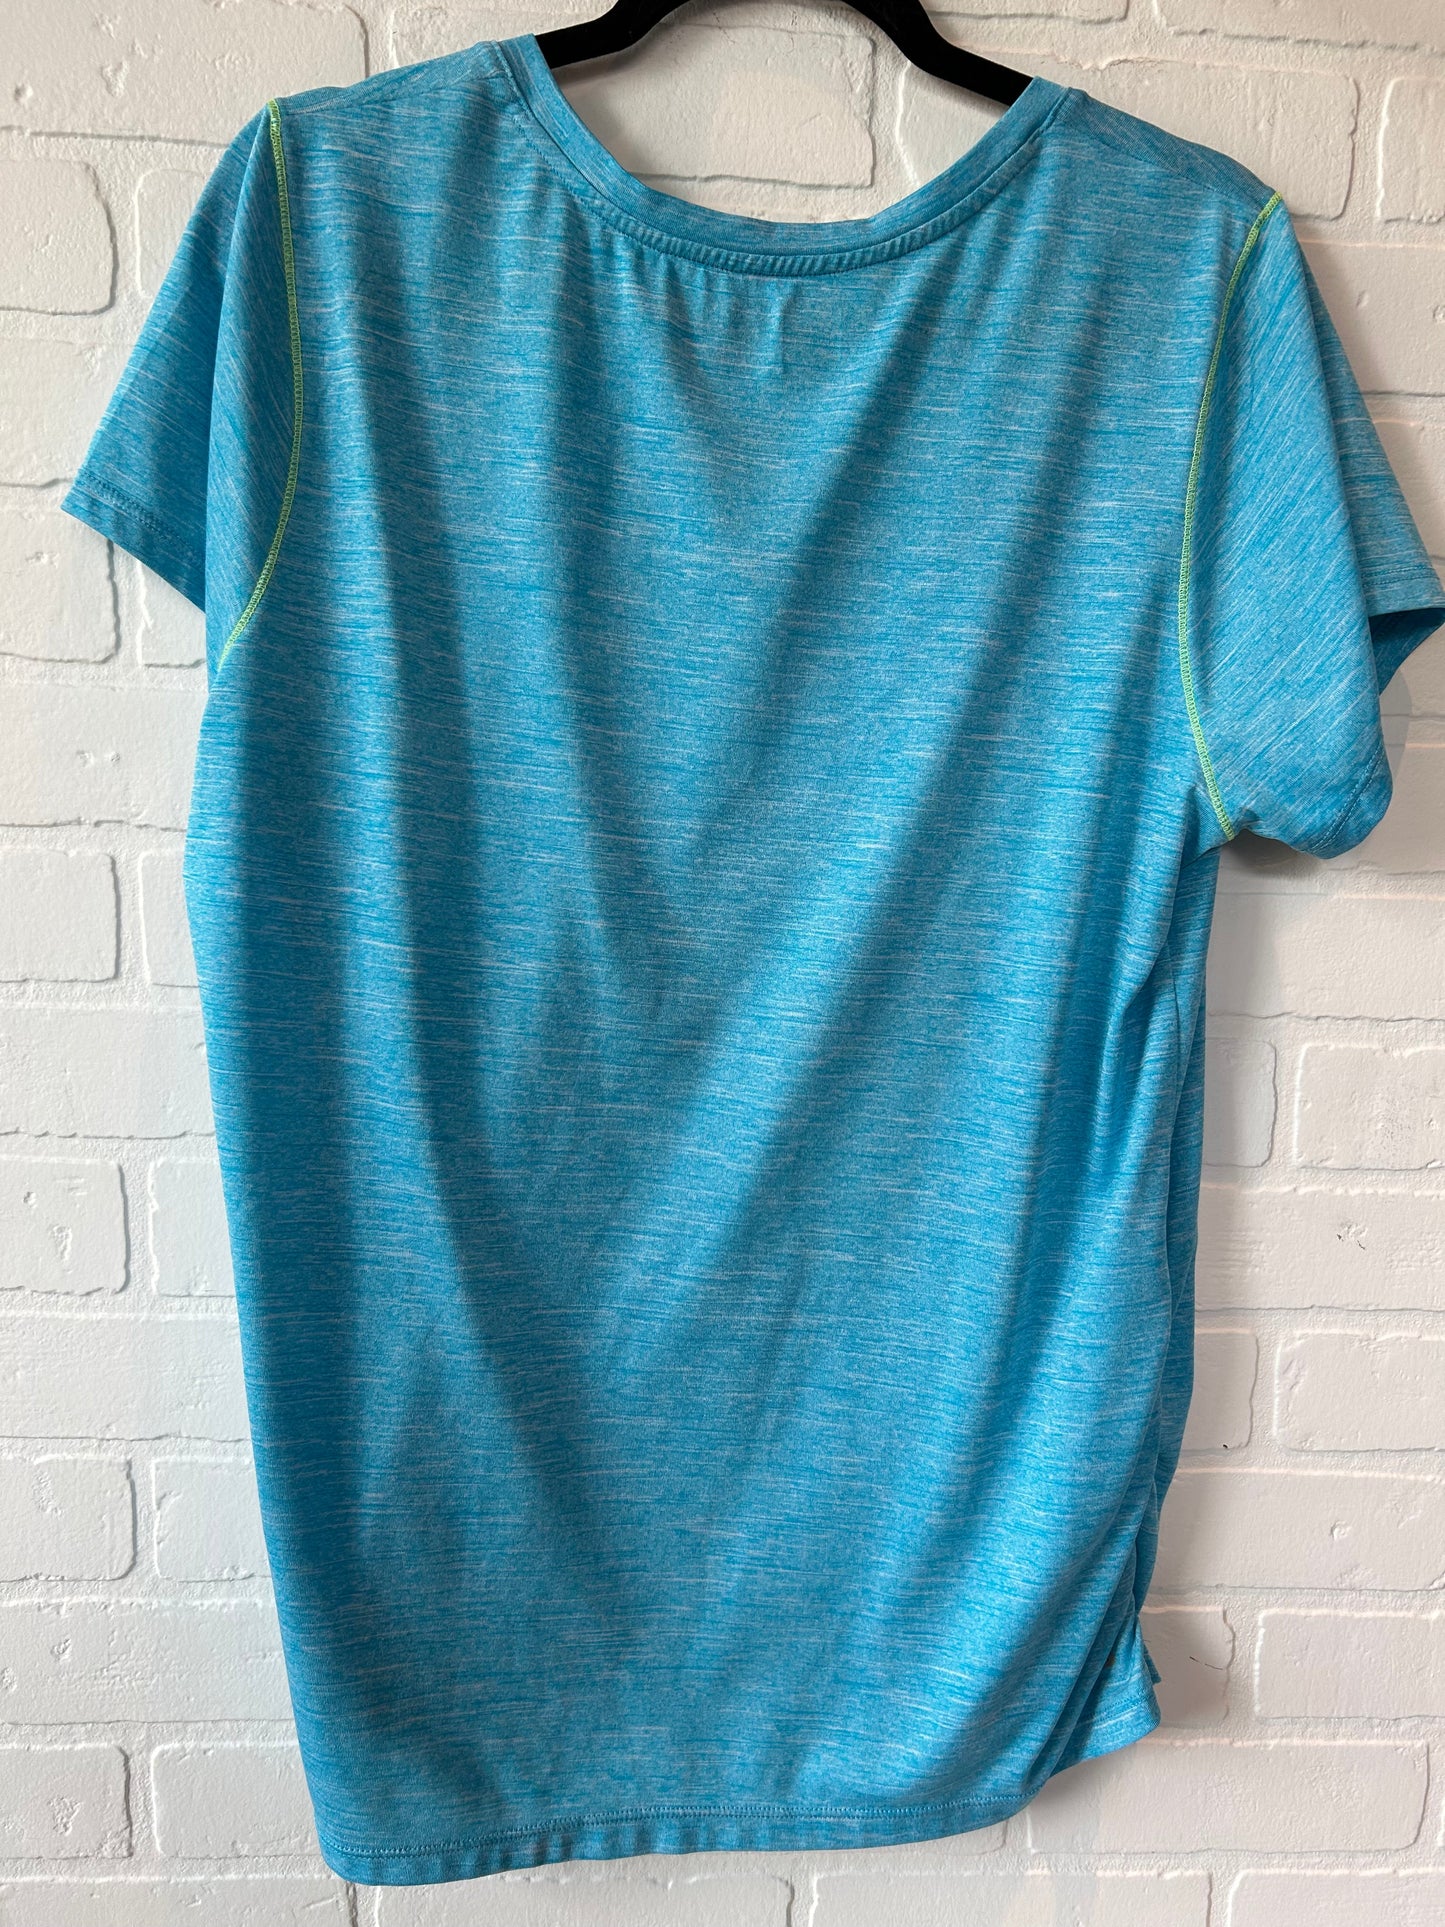 Blue Athletic Top Short Sleeve Rbx, Size 1x